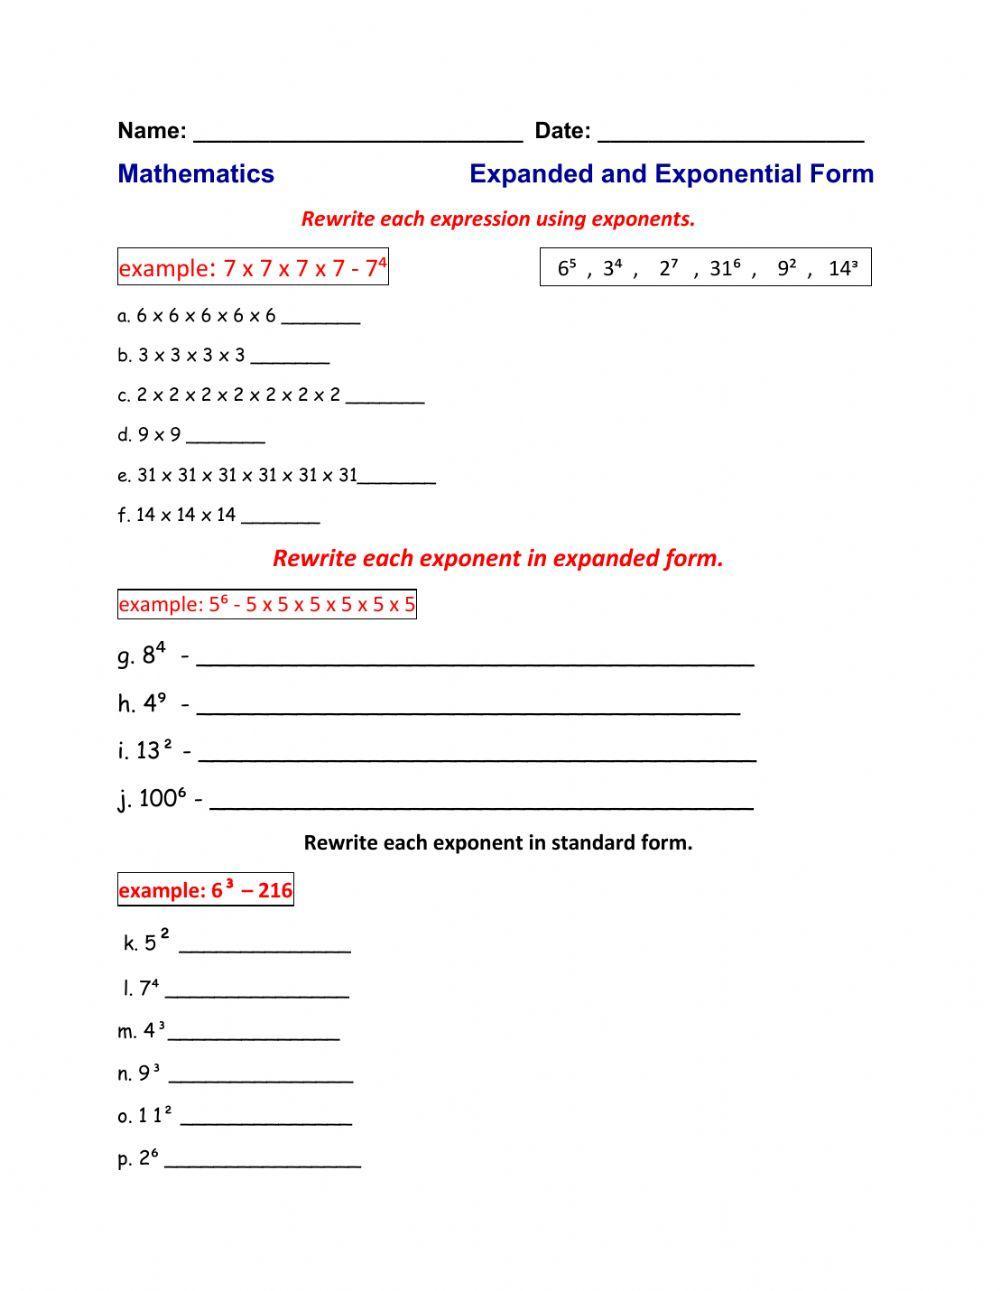 Exponential, Expanded forms and Zero